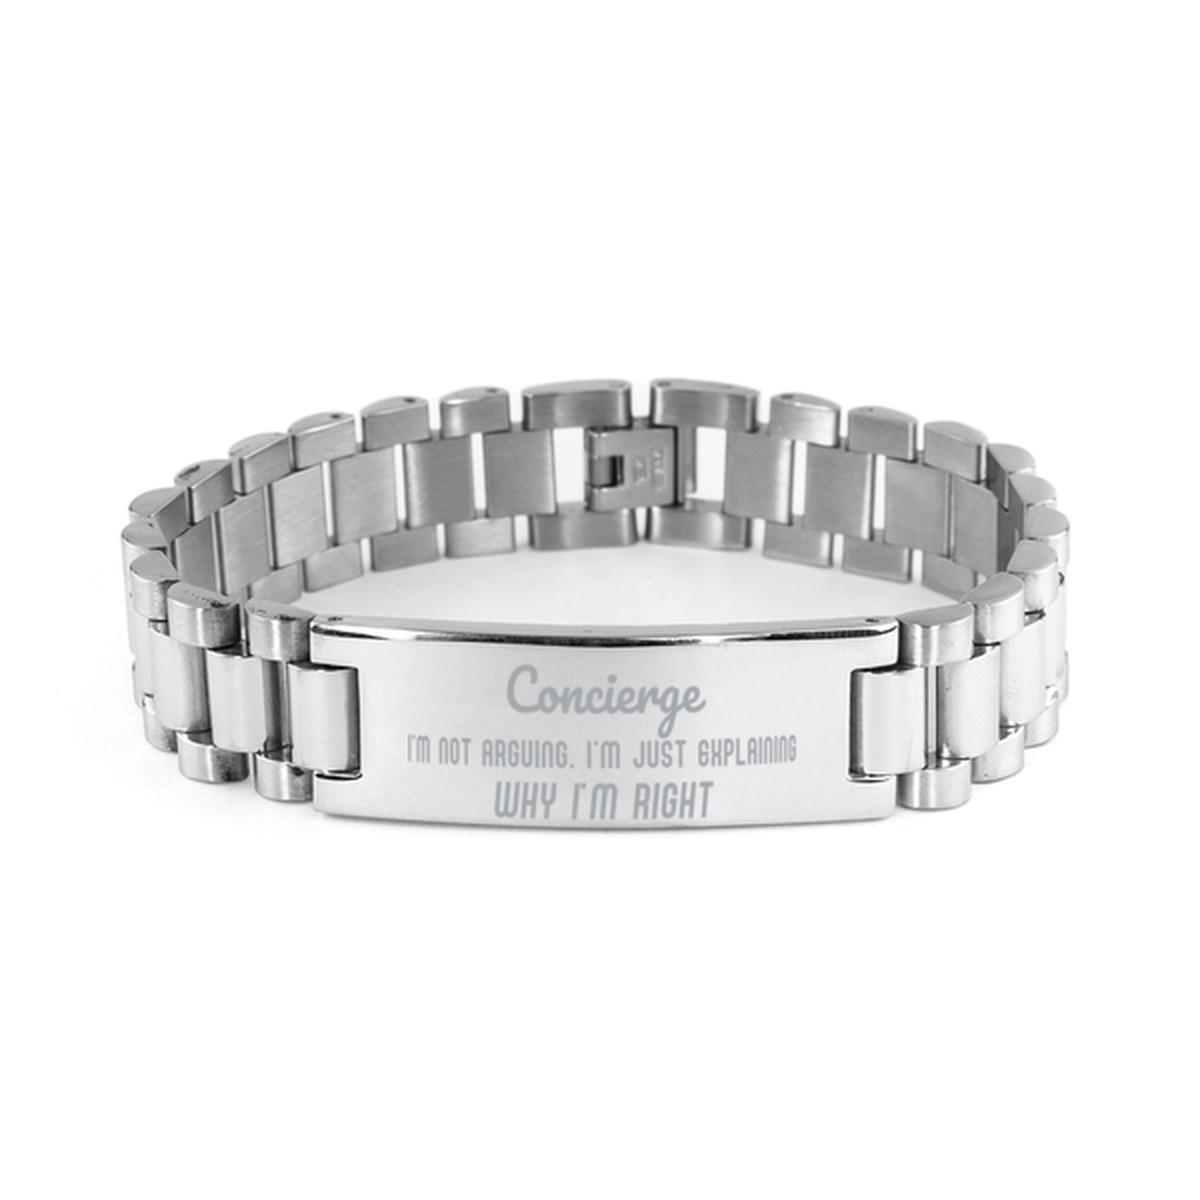 Concierge I'm not Arguing. I'm Just Explaining Why I'm RIGHT Ladder Stainless Steel Bracelet, Graduation Birthday Christmas Concierge Gifts For Concierge Funny Saying Quote Present for Men Women Coworker